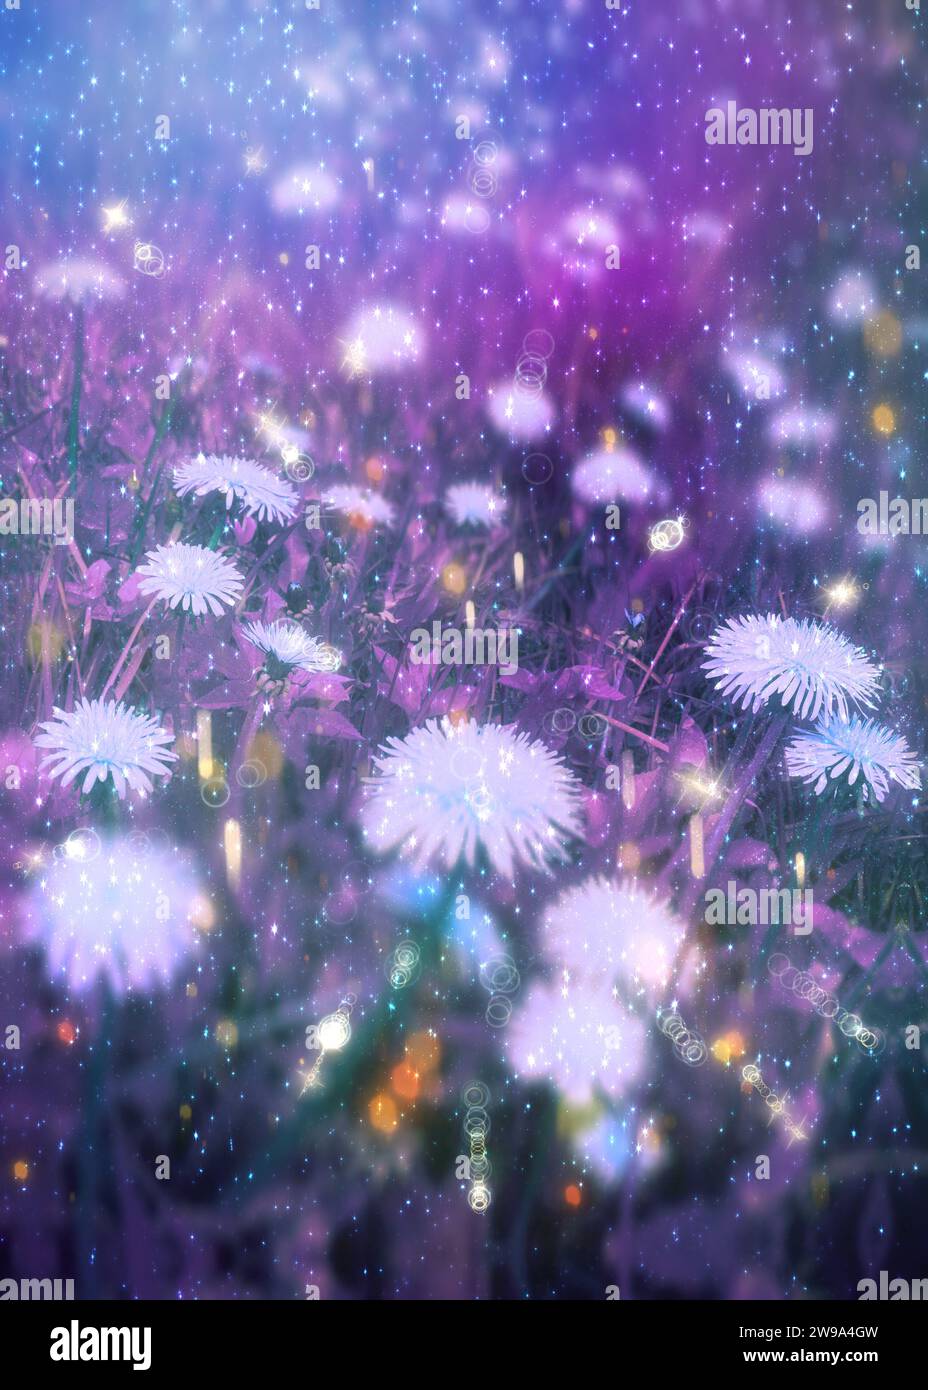 Abstract dandelion flowers in purple grass with fairy dust, photo manipulation, illustration. Stock Photo